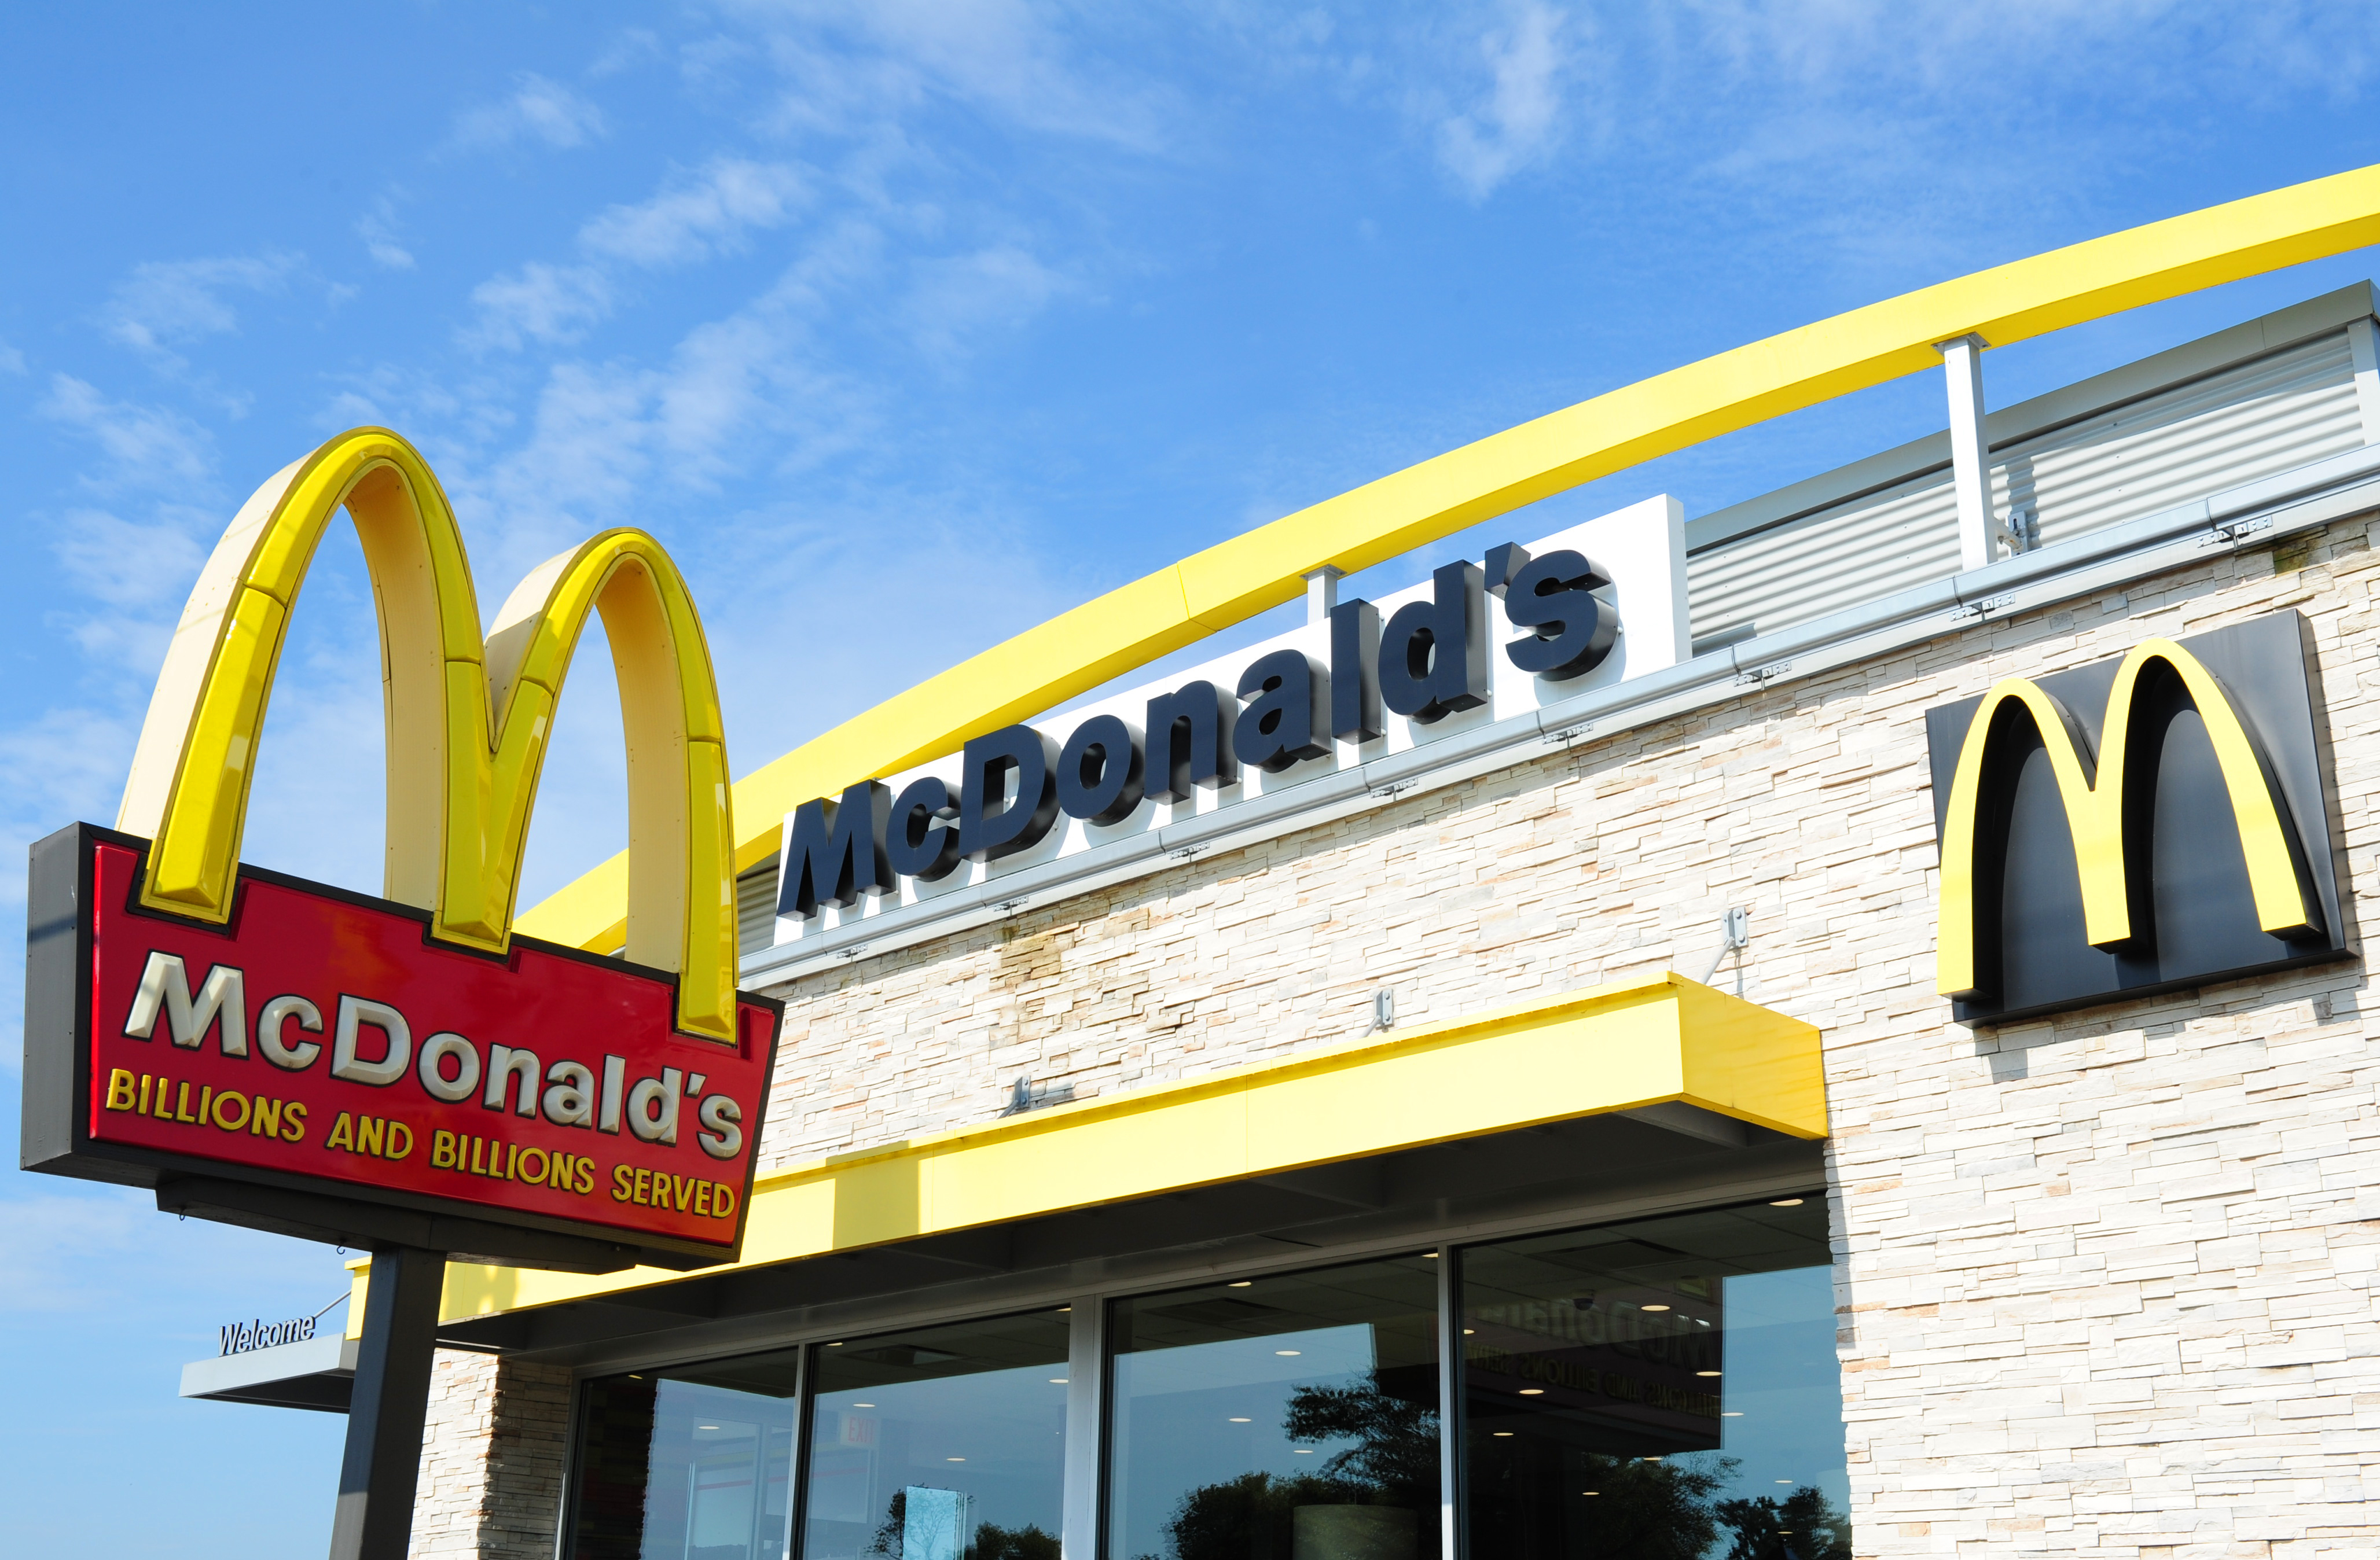 (FILES) This file photo taken on September 10, 2016 shows the McDonald's restaurant in Gettysburg, Pennsylvania. McDonald's reported slightly lower fourth-quarter earnings on January 23, 2017 as strong sales in Britain, Japan, China offset a drop in the United States. The fast-food giant, which modified its menu in its home market after a lengthy slump, and restructured its international business, said its turnaround remained on track.   / AFP PHOTO / Karen BLEIER